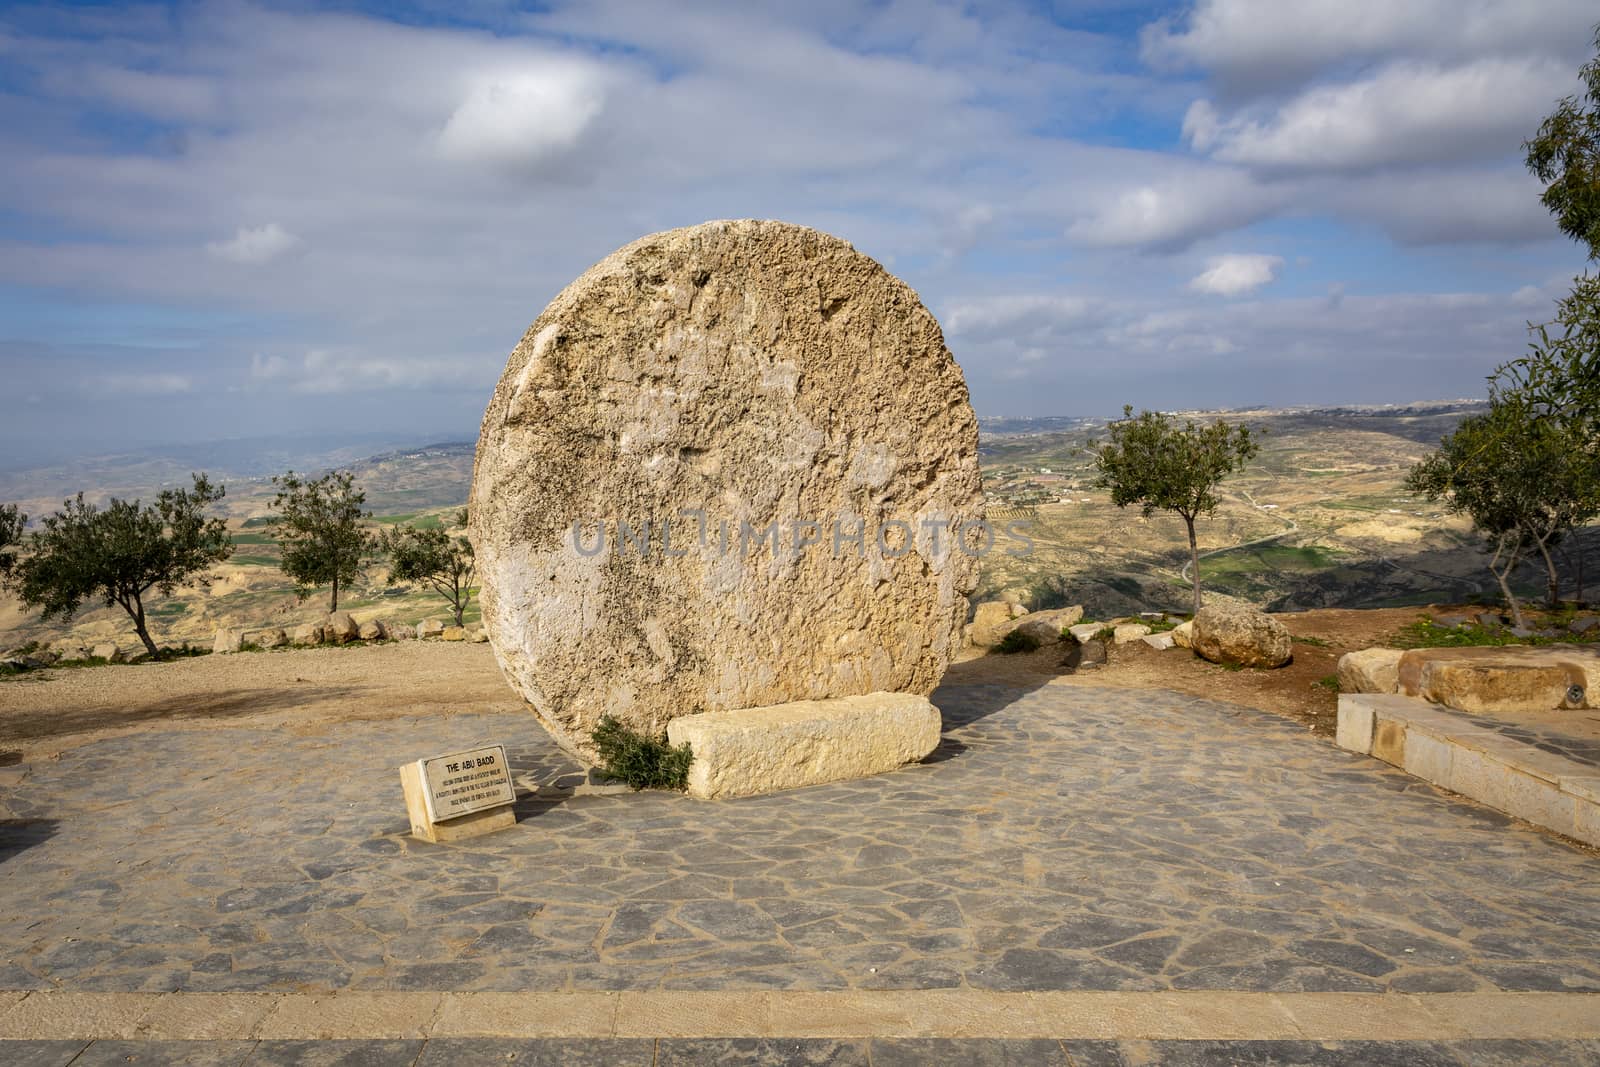 Mount Nebo, Jordan, March 2020: Abu Badd rolling wheel at Mount Nebo, Rolling stone used as the fortified door of a Byzantine monastery